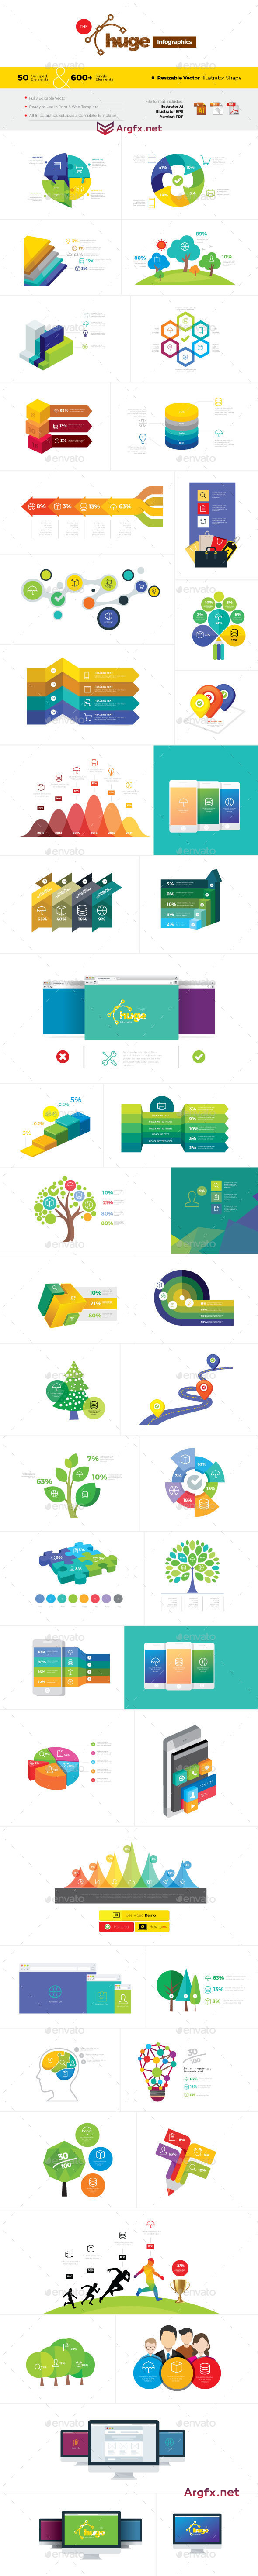  GraphicRiver - Huge - Clean & Brand Infographics 14456889